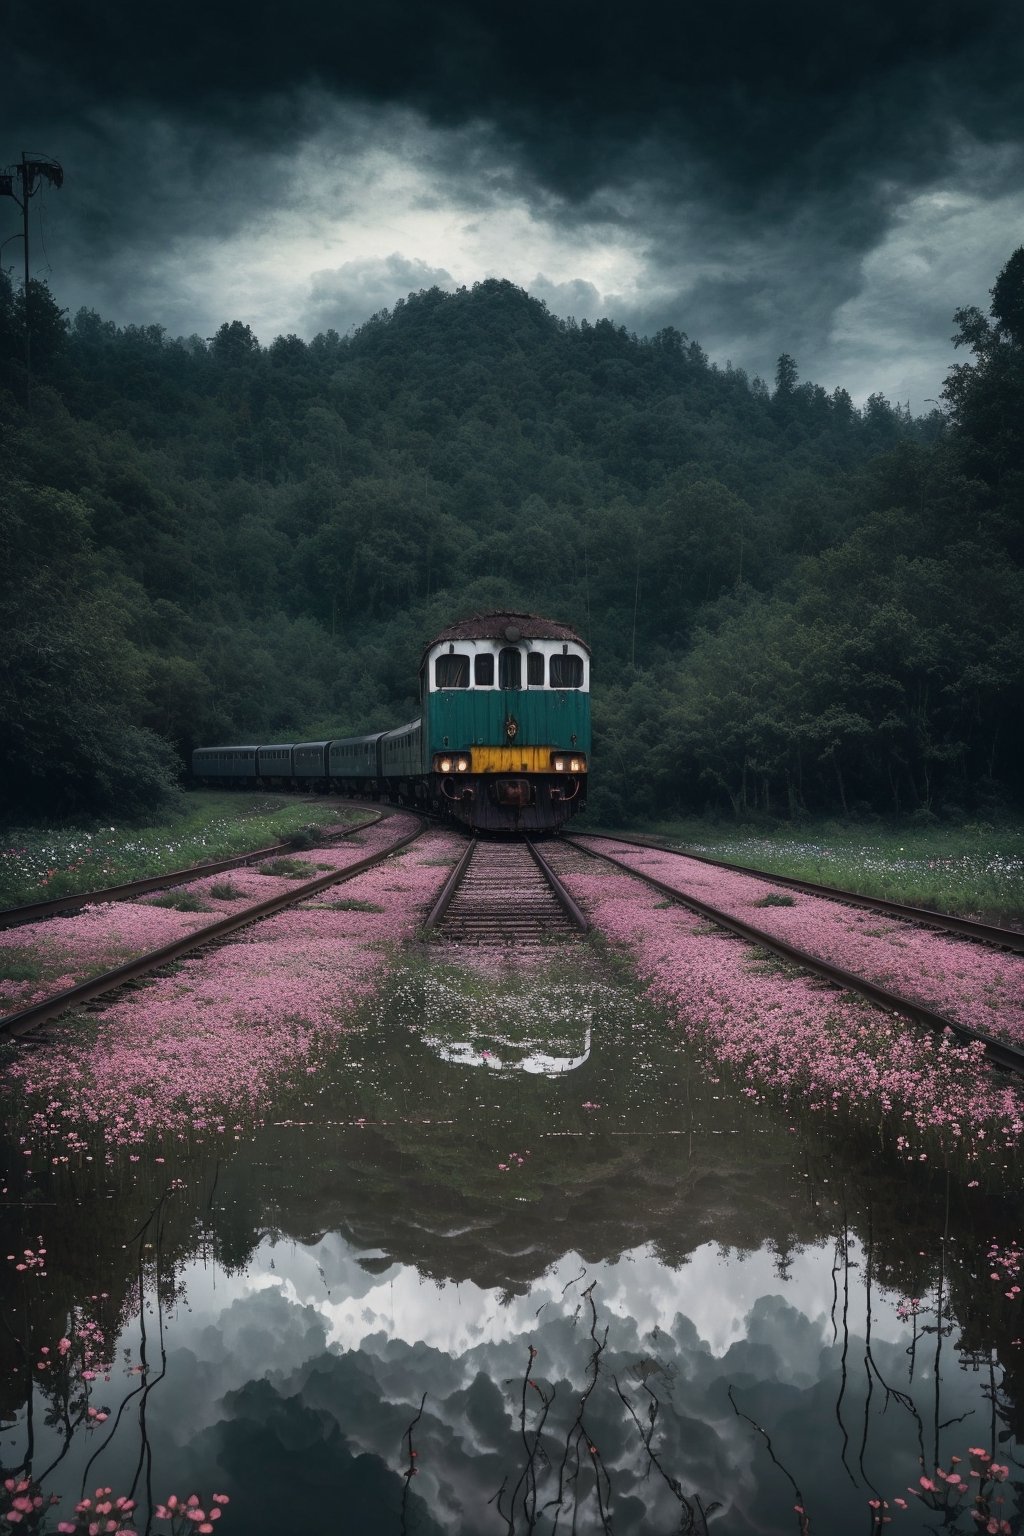 (masterpiece, best quality, very aesthetic, ultra detailed), intricate details, (no human. flower field at train track. Forest. Abandoned place), (rainy day. Cloudy. Wet ground. Water reflection. Gloomy. Ambient. Horror. Creepy), aesthetic